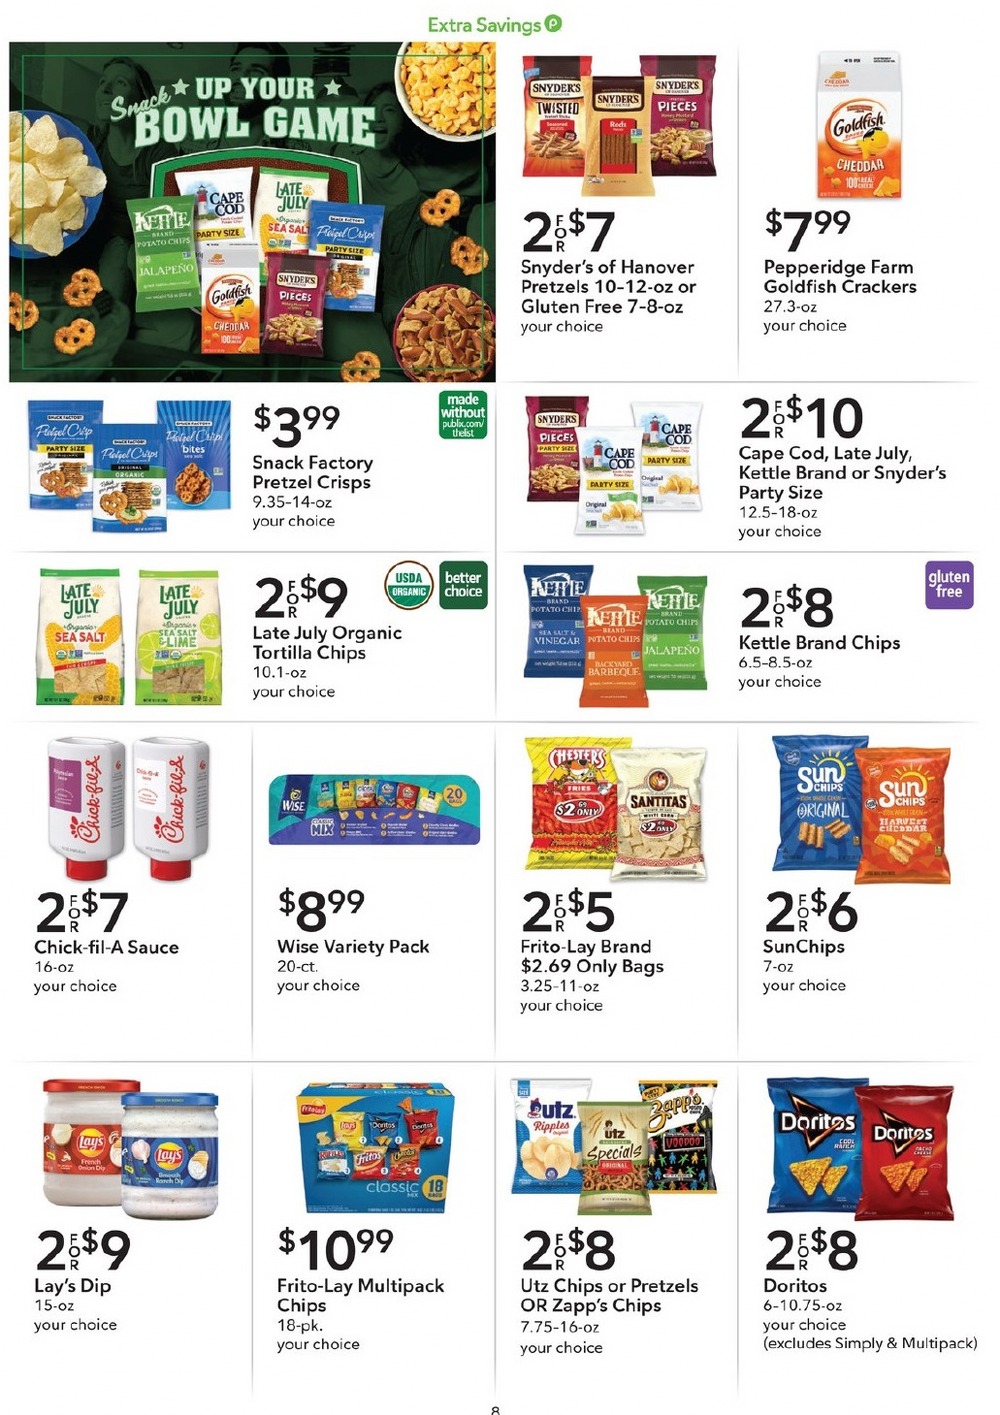 Publix Weekly Ad February 21 to February 27, 2024